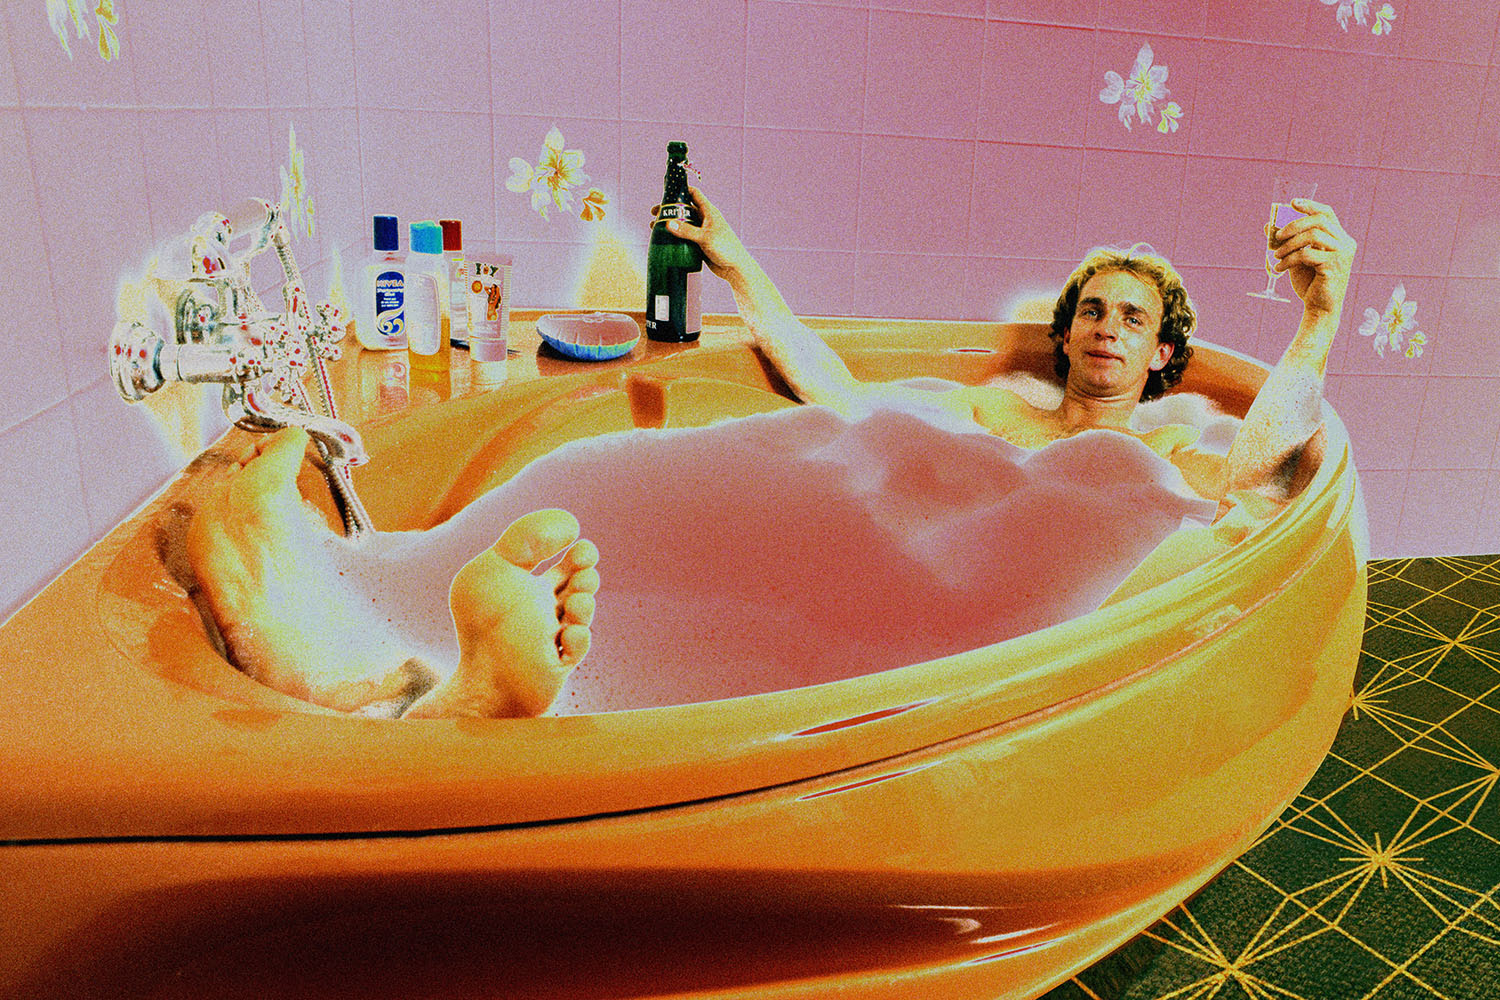 A Bath Hater’s Guide to Not Hating Baths